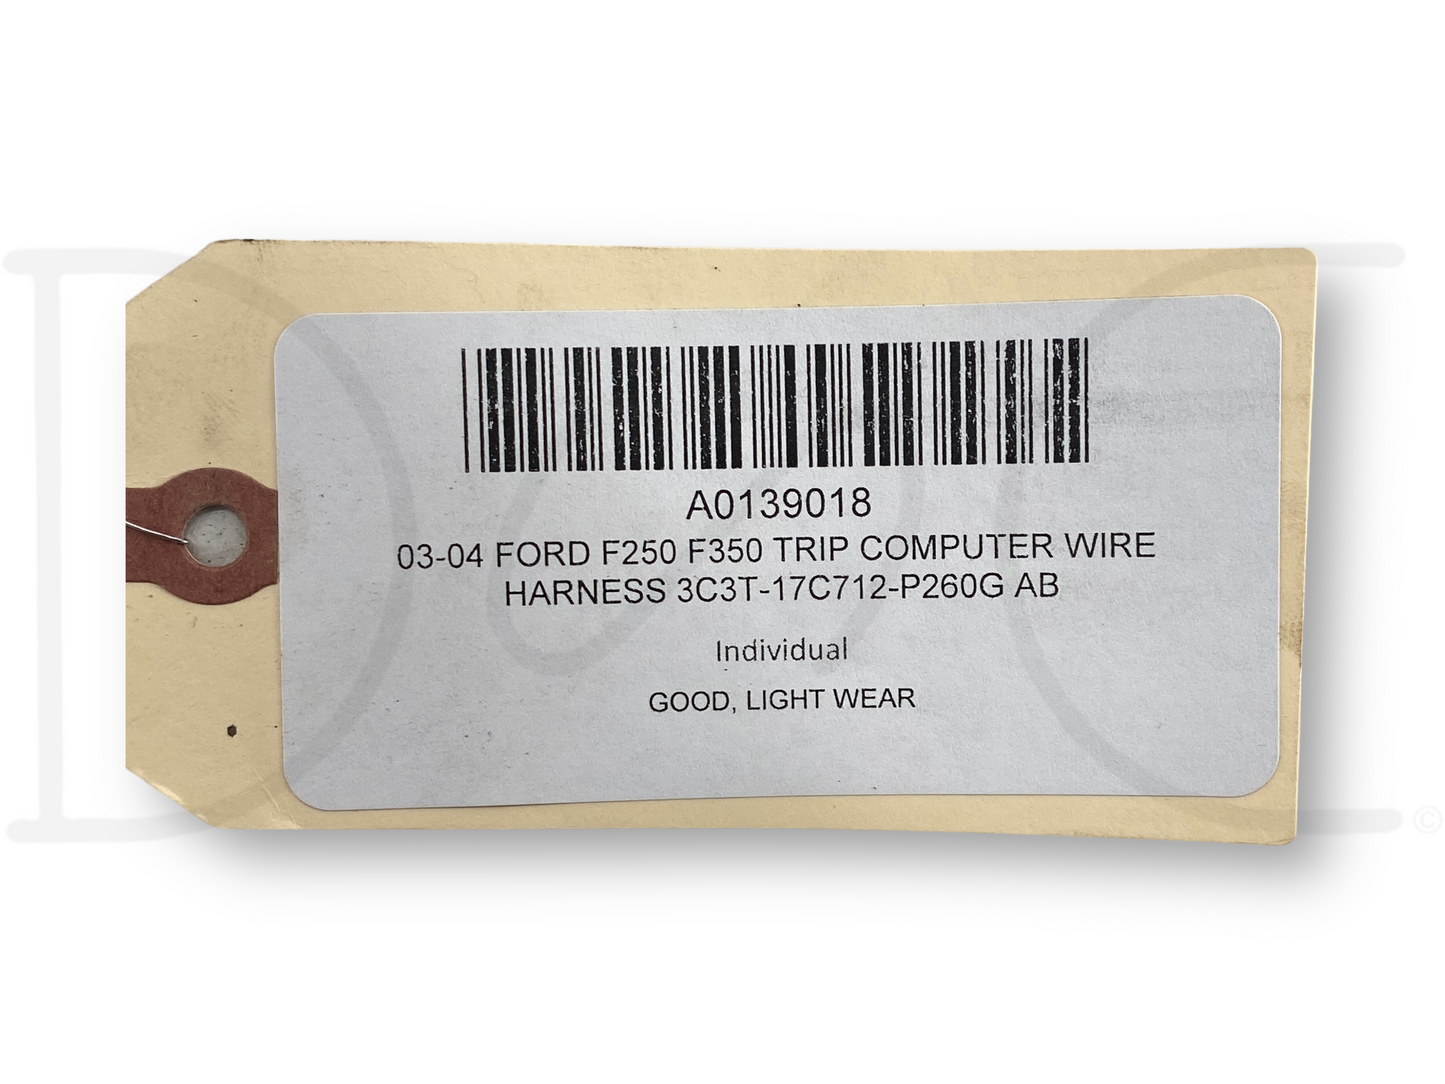 03-04 Ford F250 F350 Trip Computer Wire Harness 3C3T-17C712-P260G Ab